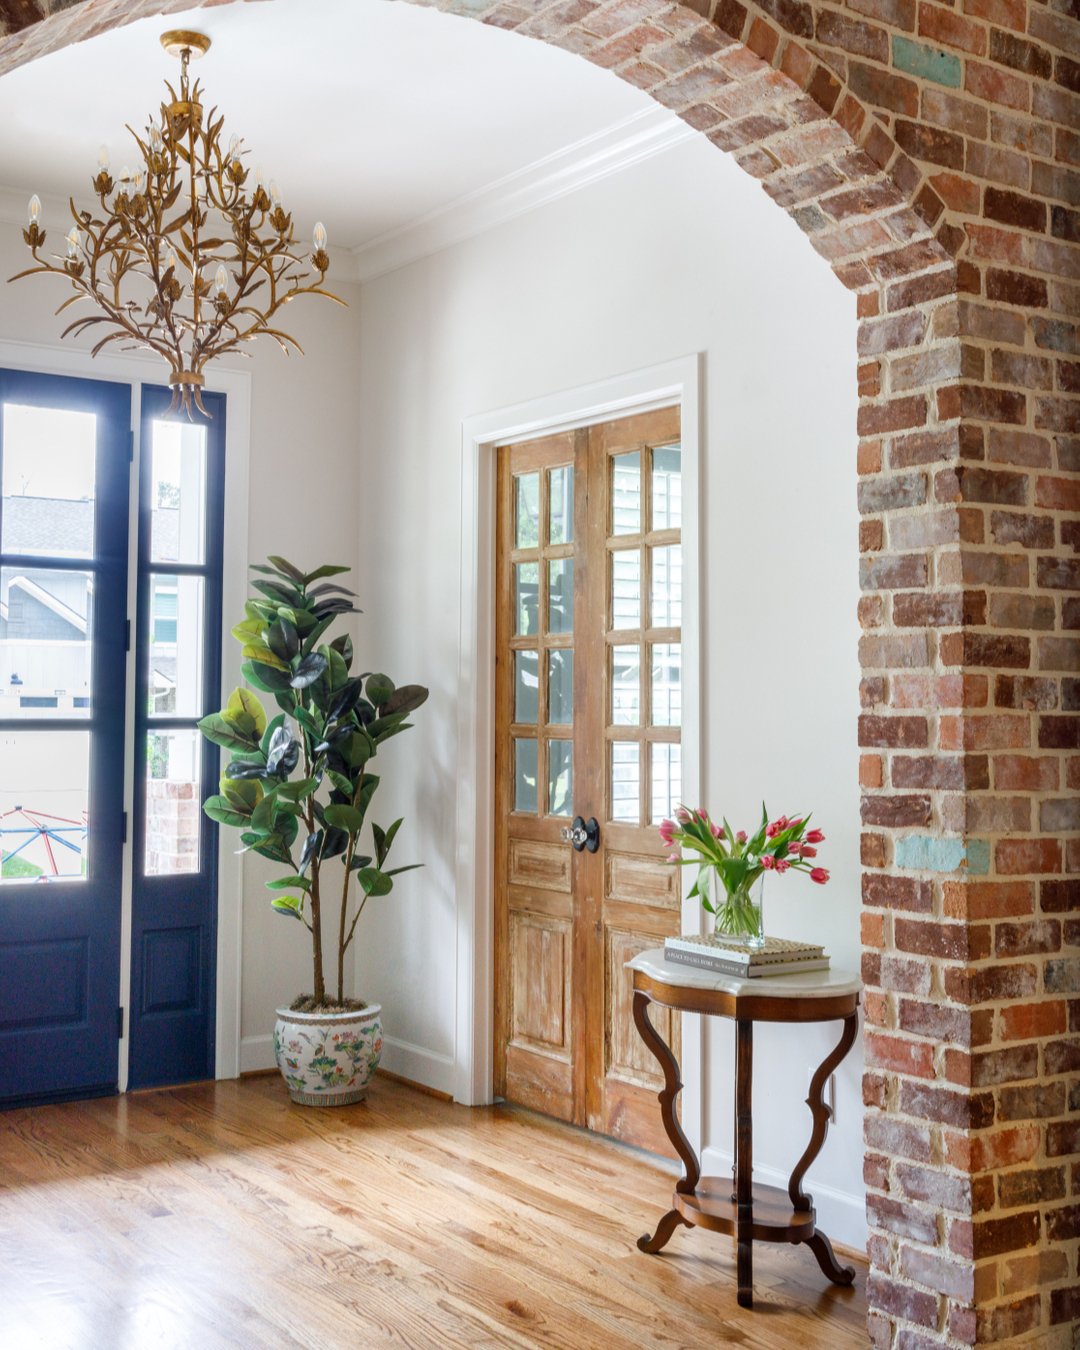 A charming entry space to welcome in all friends and family.